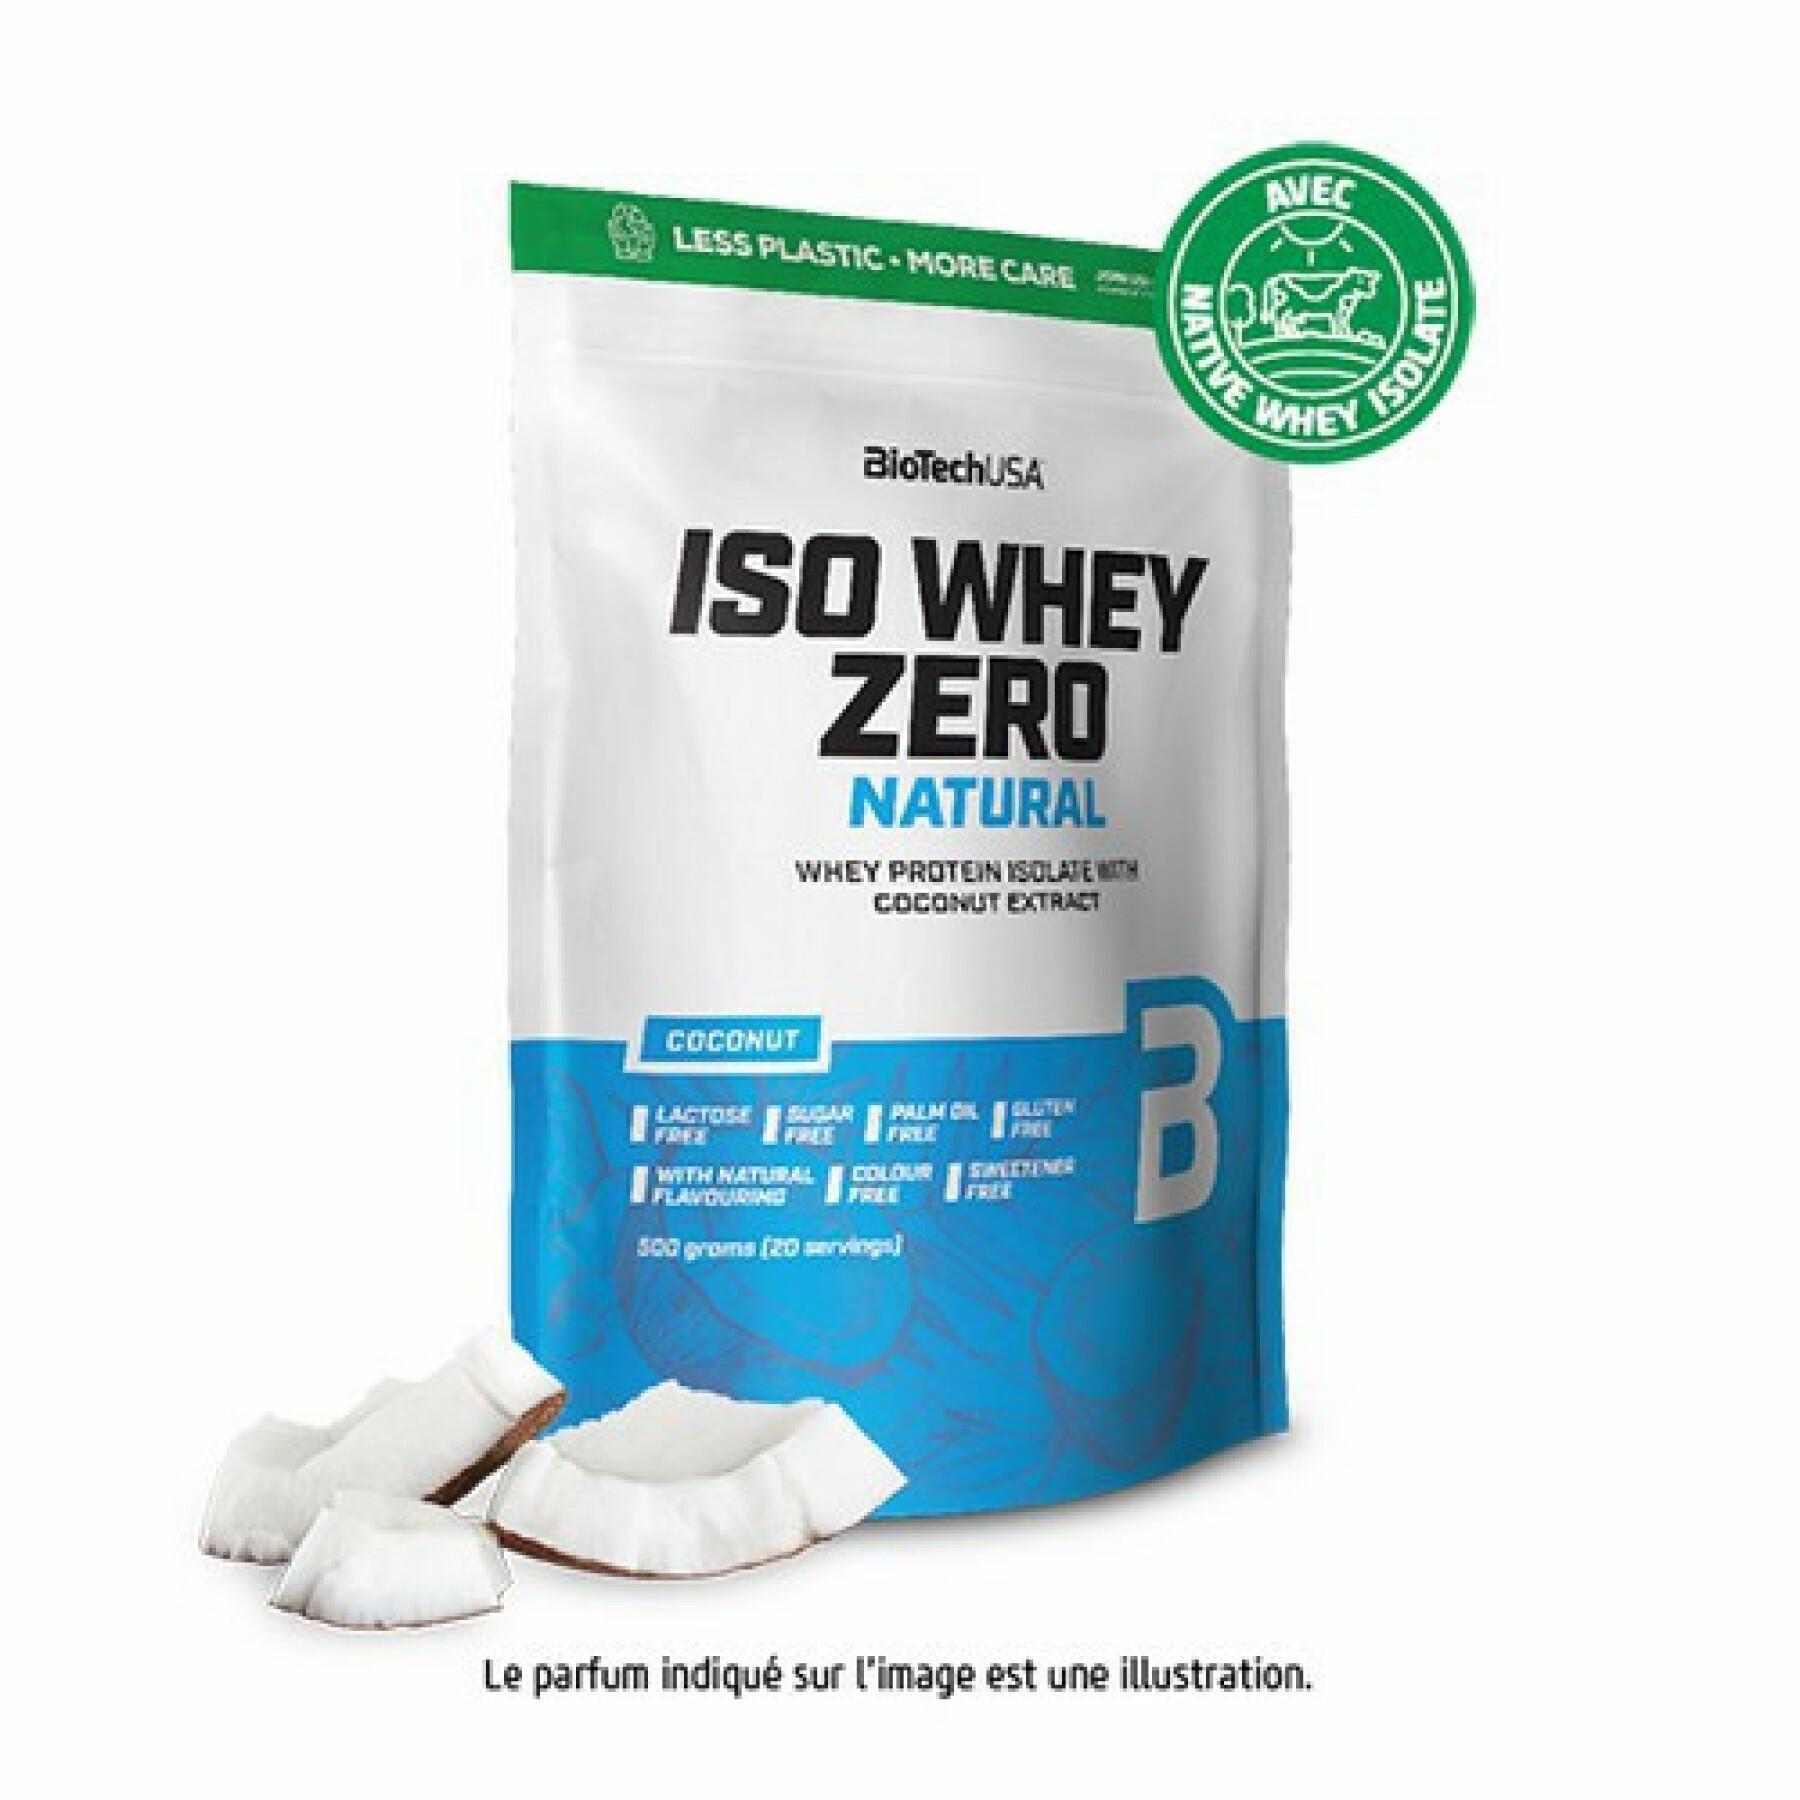 Förpackning med 10 proteinpåsar Biotech USA iso whey zero lactose free - Coco - 500g